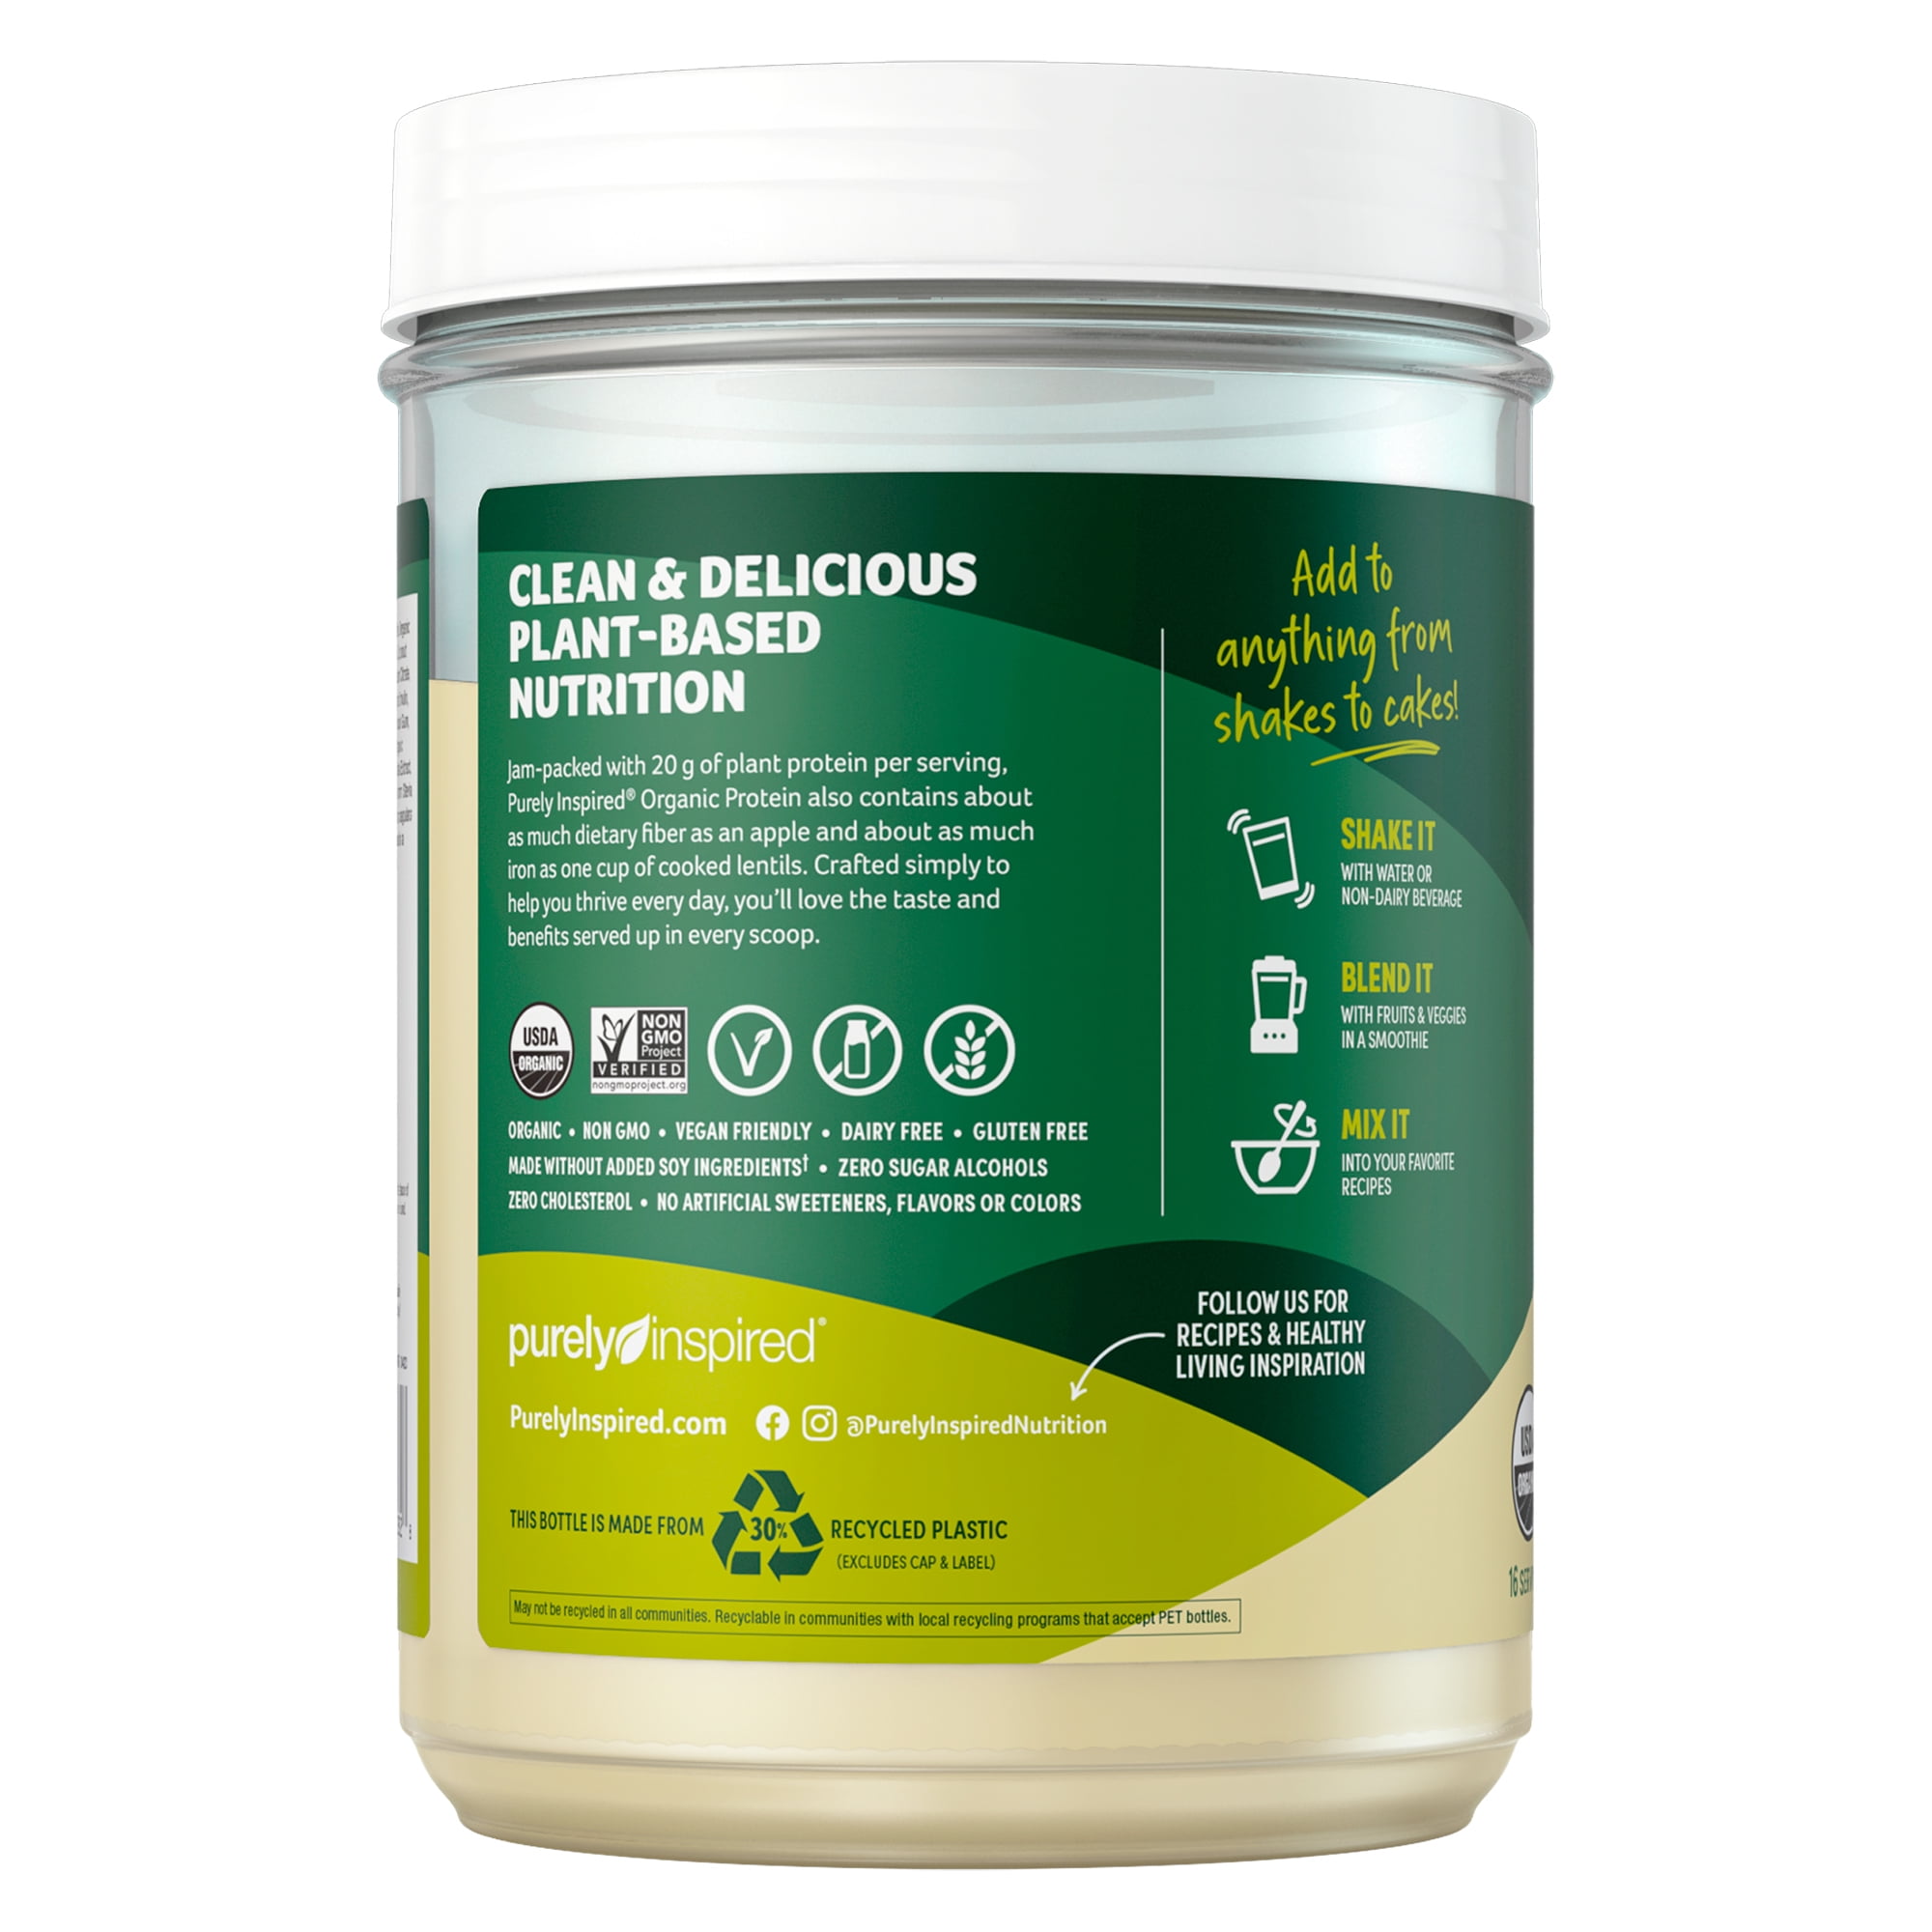 Purely Inspired Organic Plant-Based Protein Powder, Vanilla, 20g Protein,  1.25 lbs, 16 Servings 